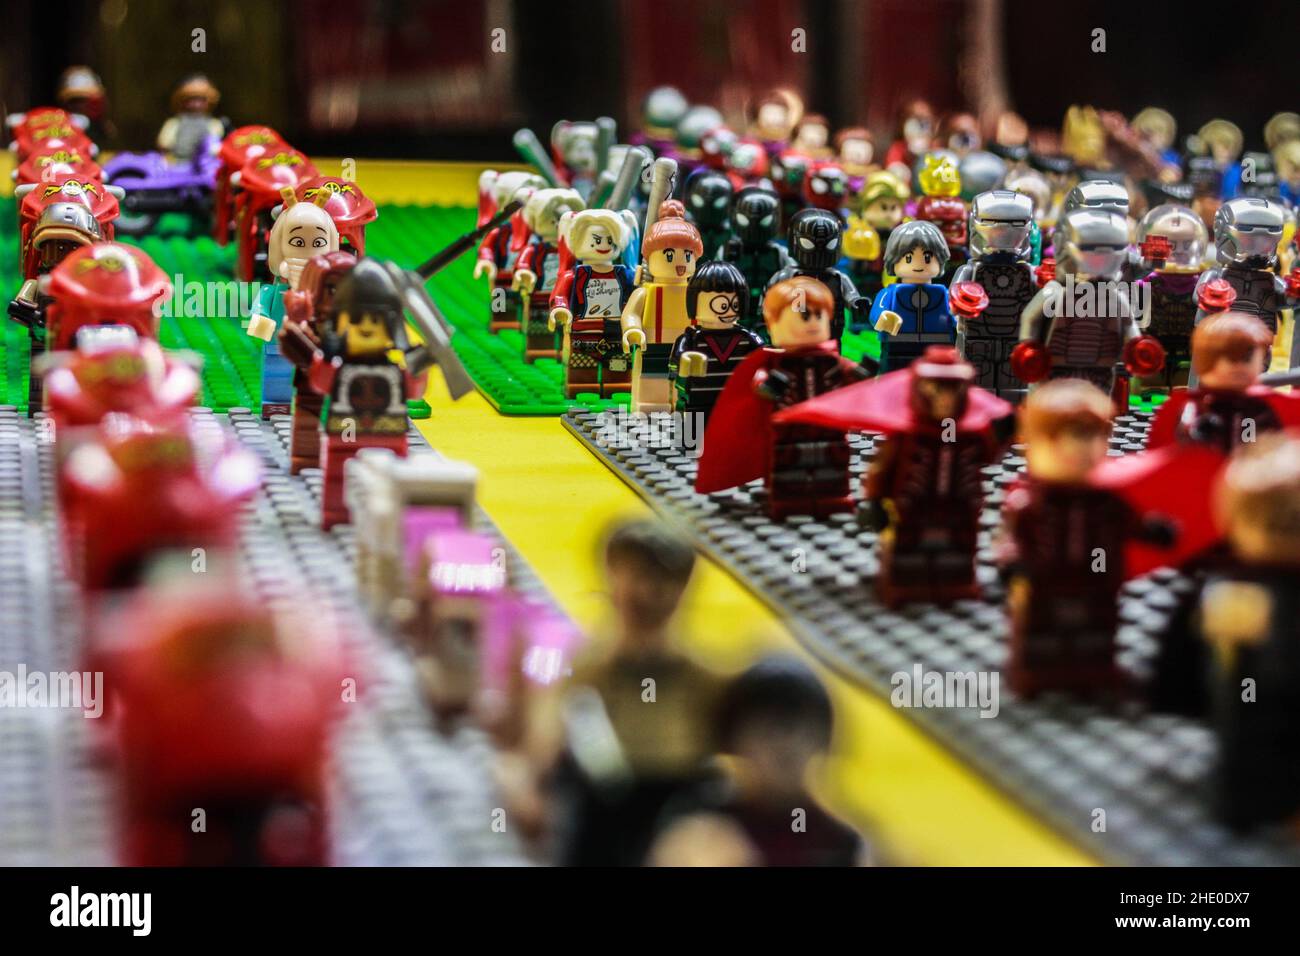 Lego collectibles sit in a case at the Florida State Fair Stock Photo